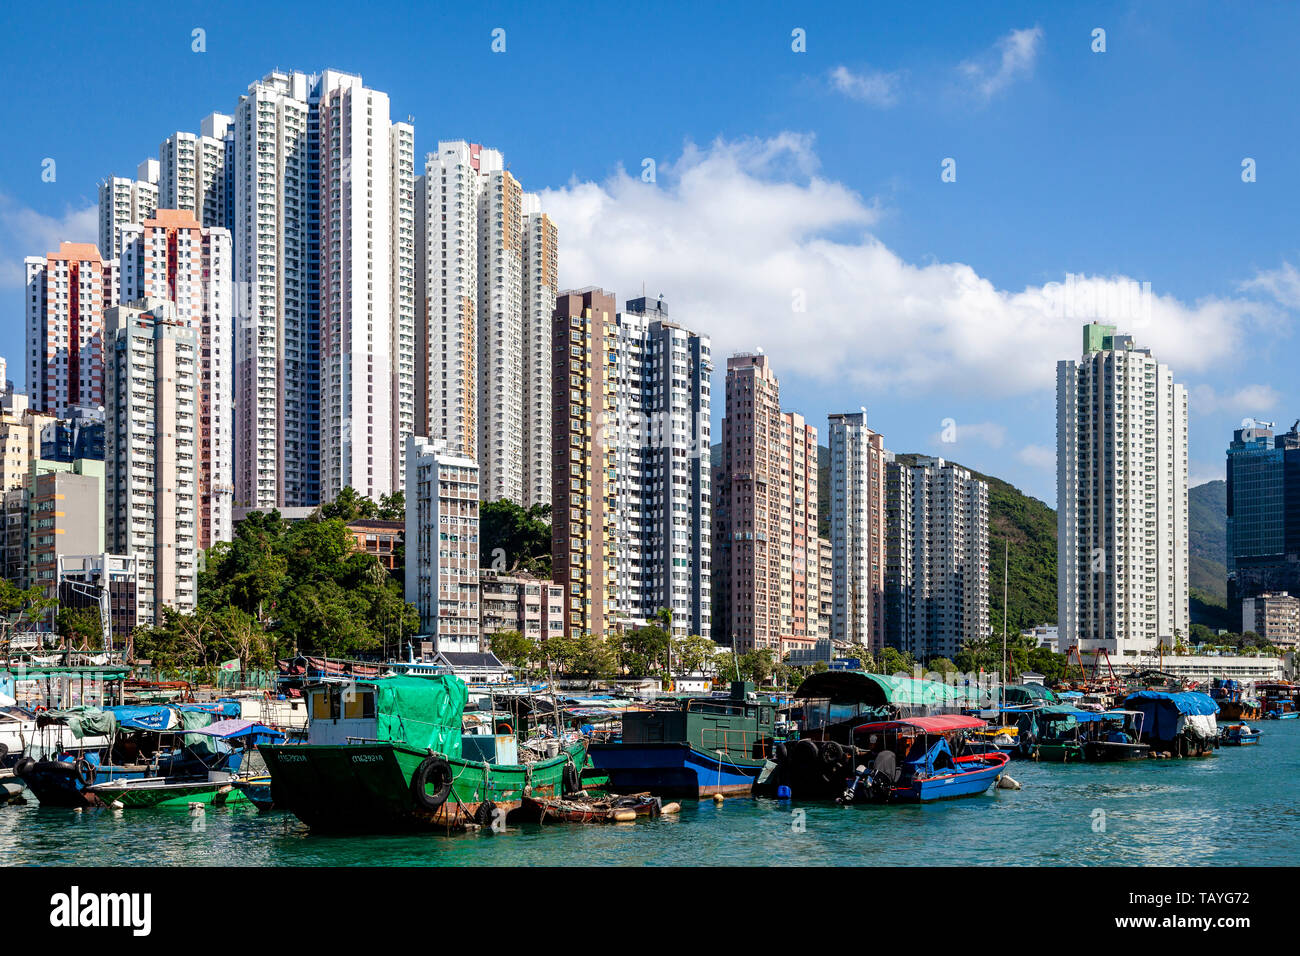 Aberdeen Harbour and Skyline, Hong Kong, China Stock Photo